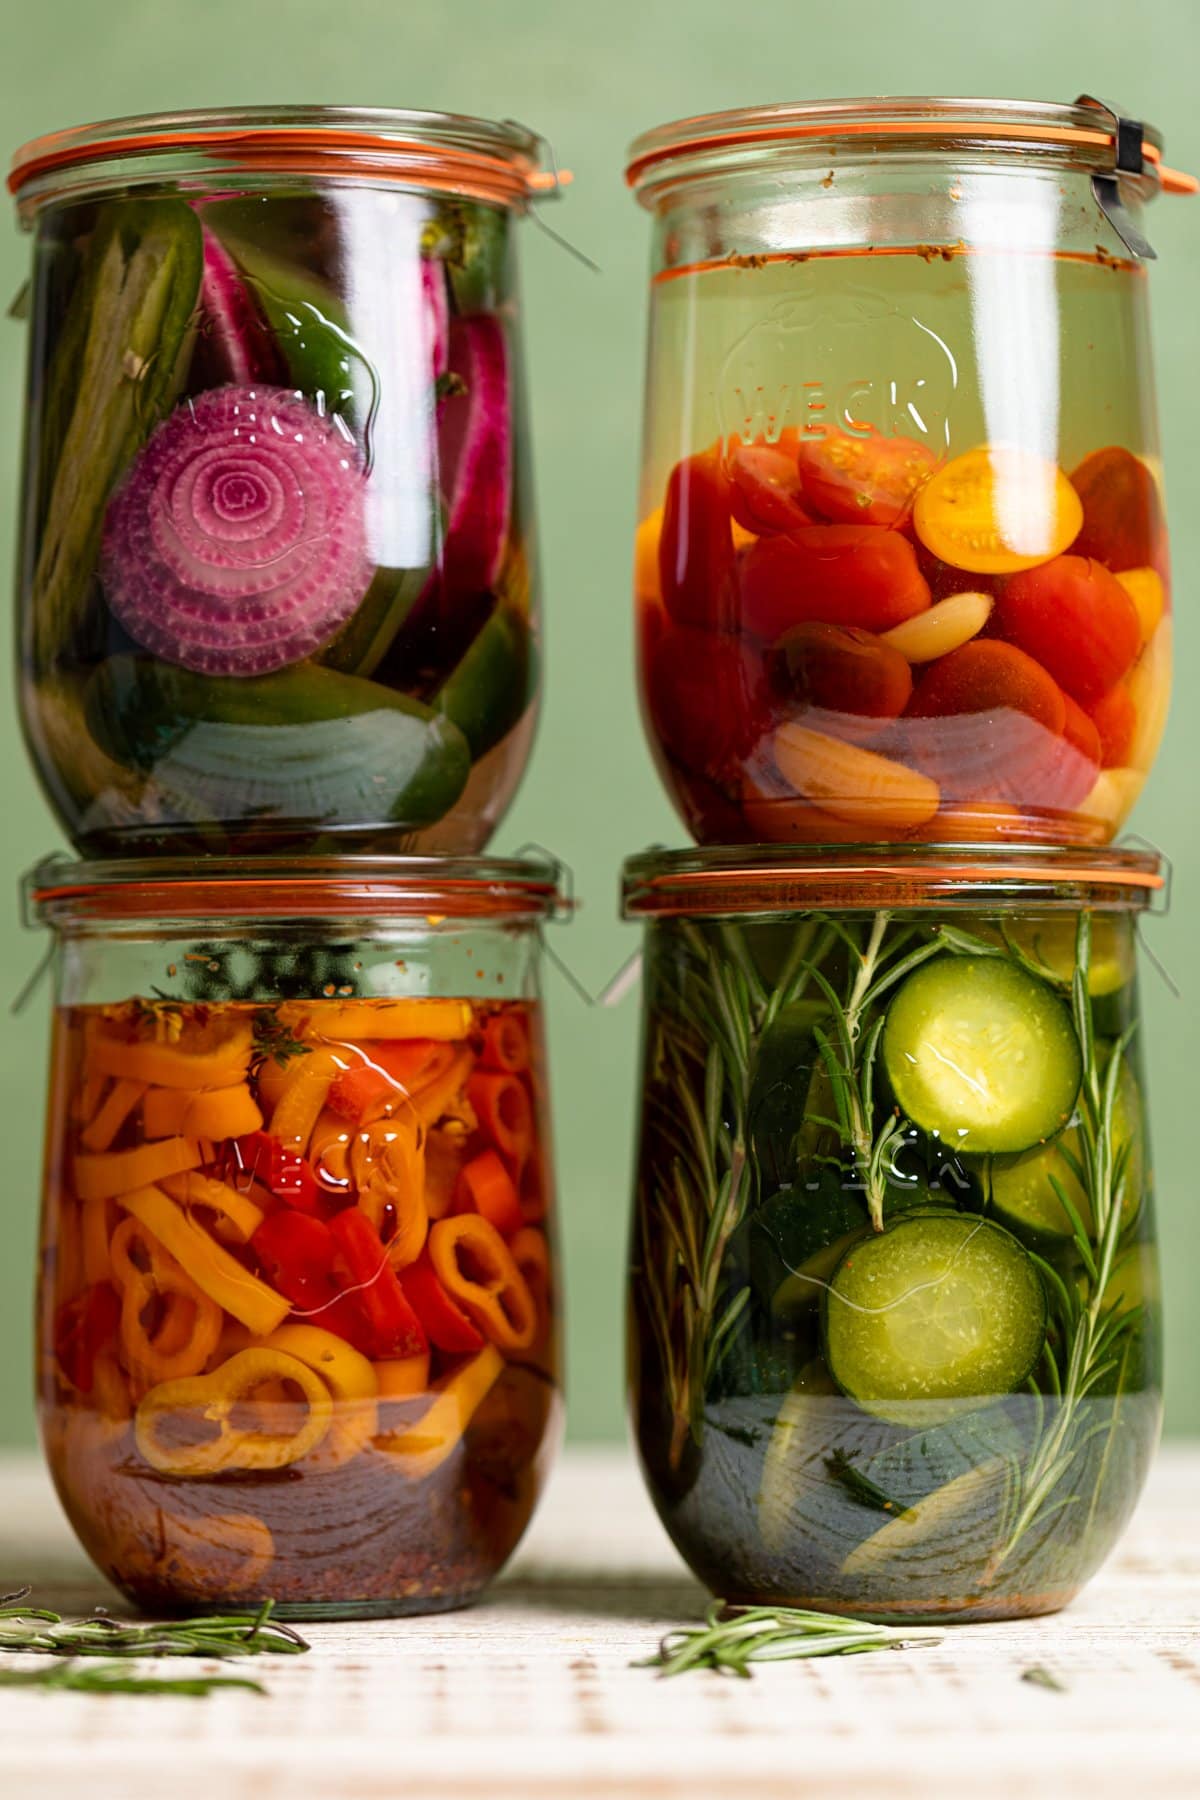 How to Make Quick Pickled Vegetables